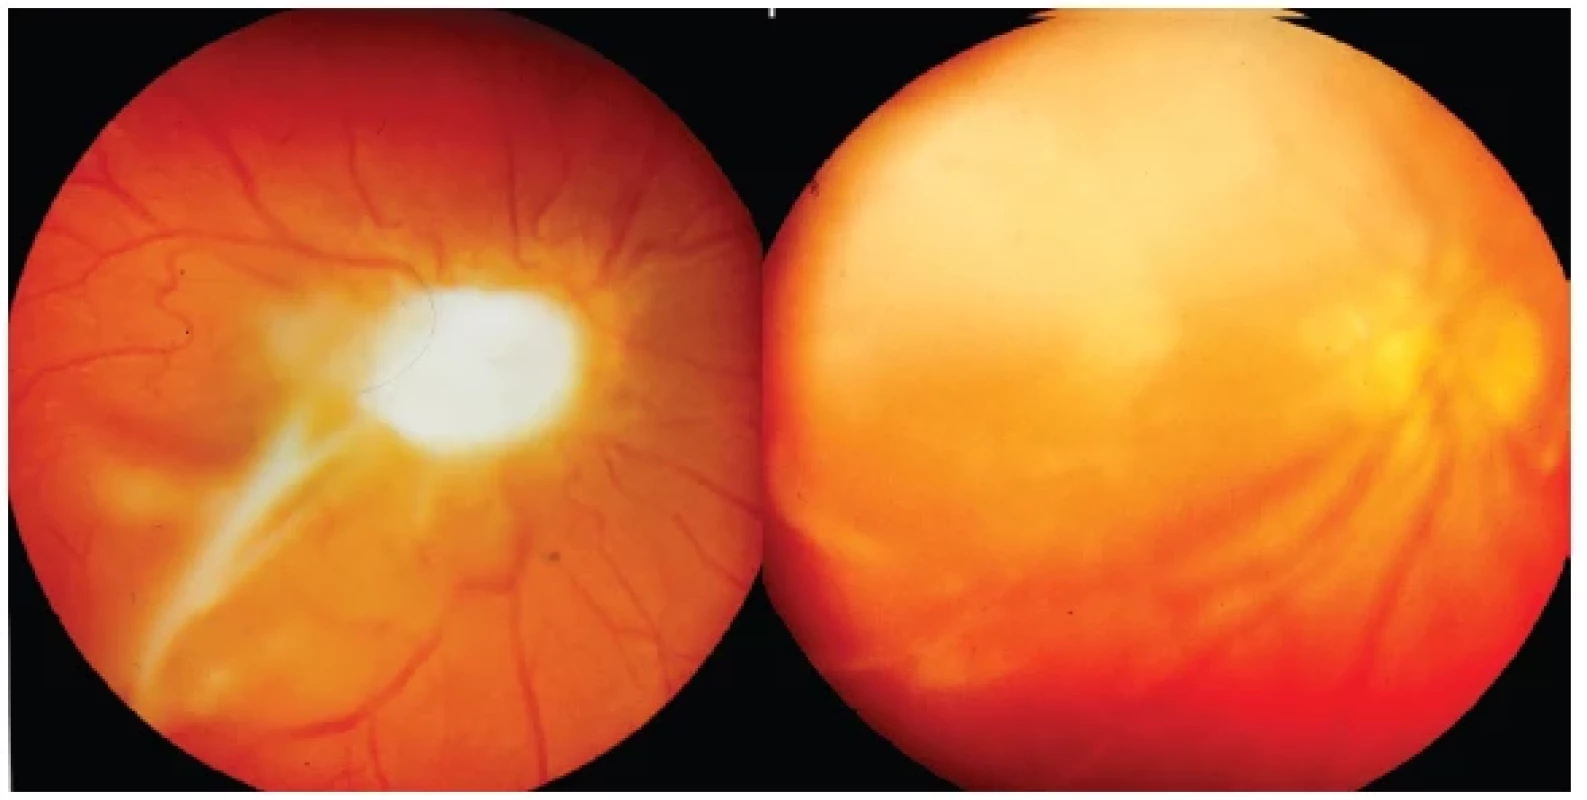 Left: Toxocara granuloma lying above the optic nerve papilla and macular region with preretinal membranous structures and vitritis
Right: Extensive whitish toxocara granuloma extending from the macular area into the upper central periphery of retina with vitritis
